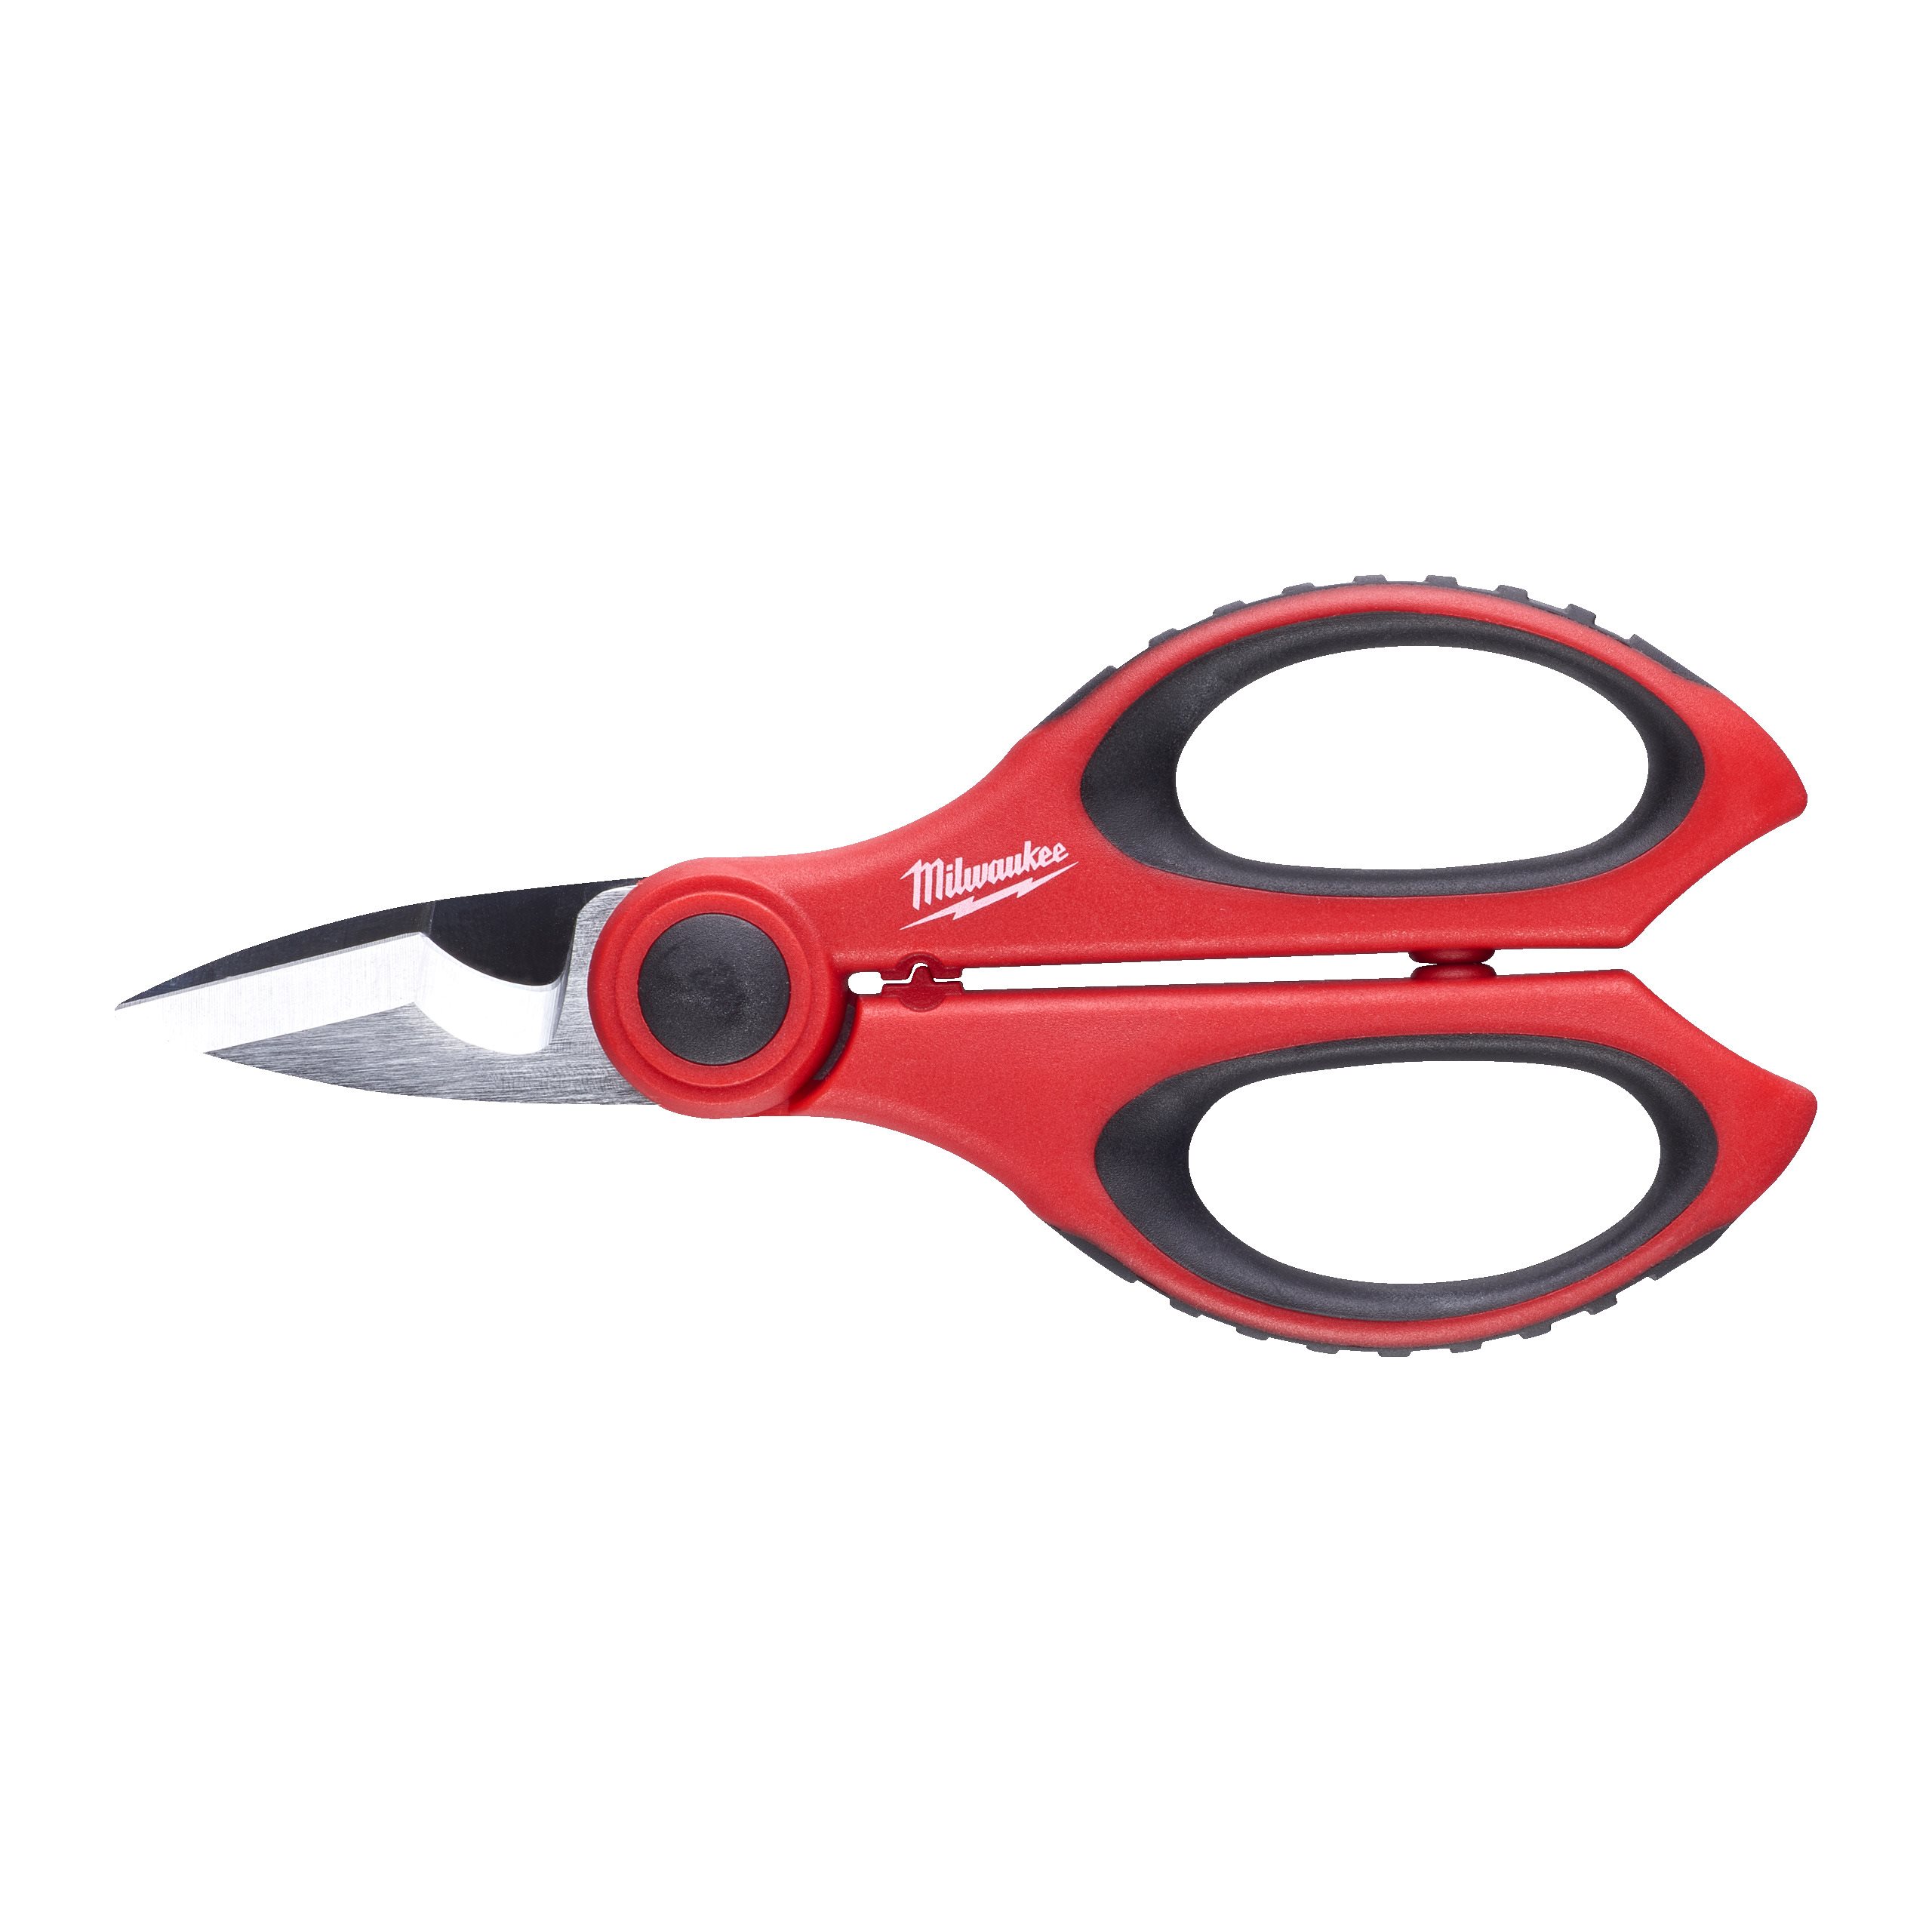 Milwaukee Electrician Scissors and Snips